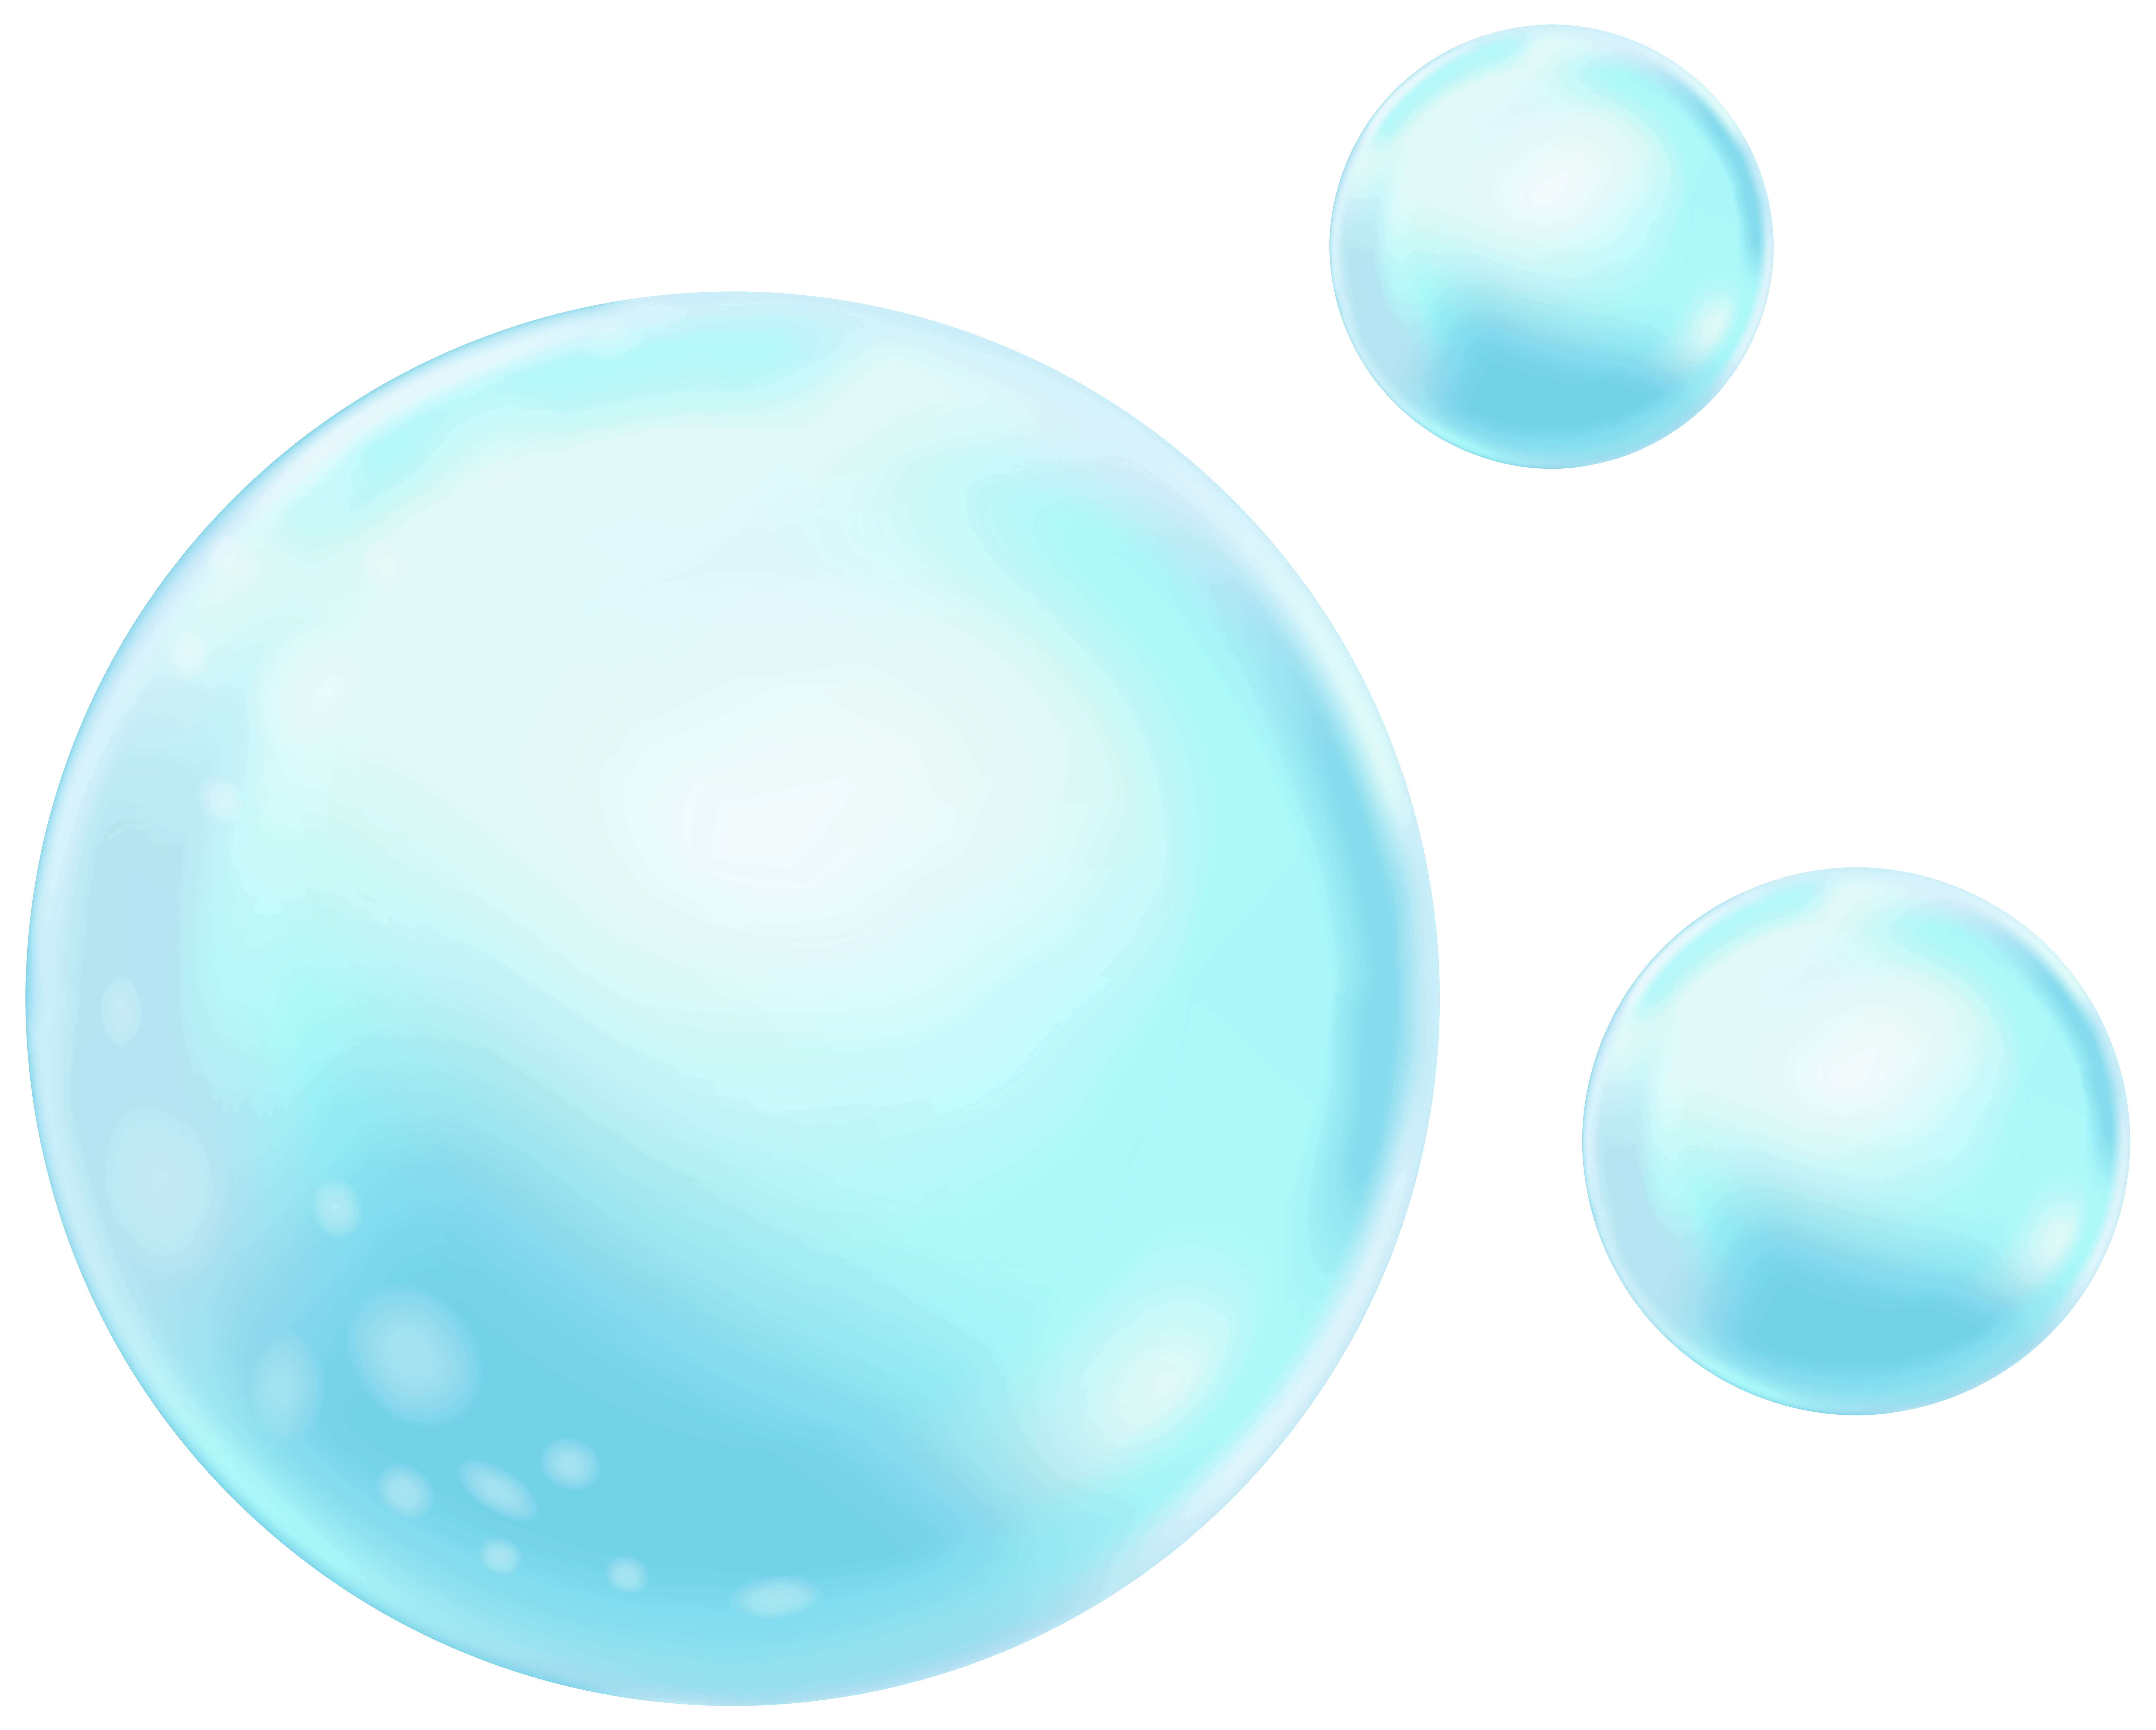 Water Bubbles PNGs for Free Download